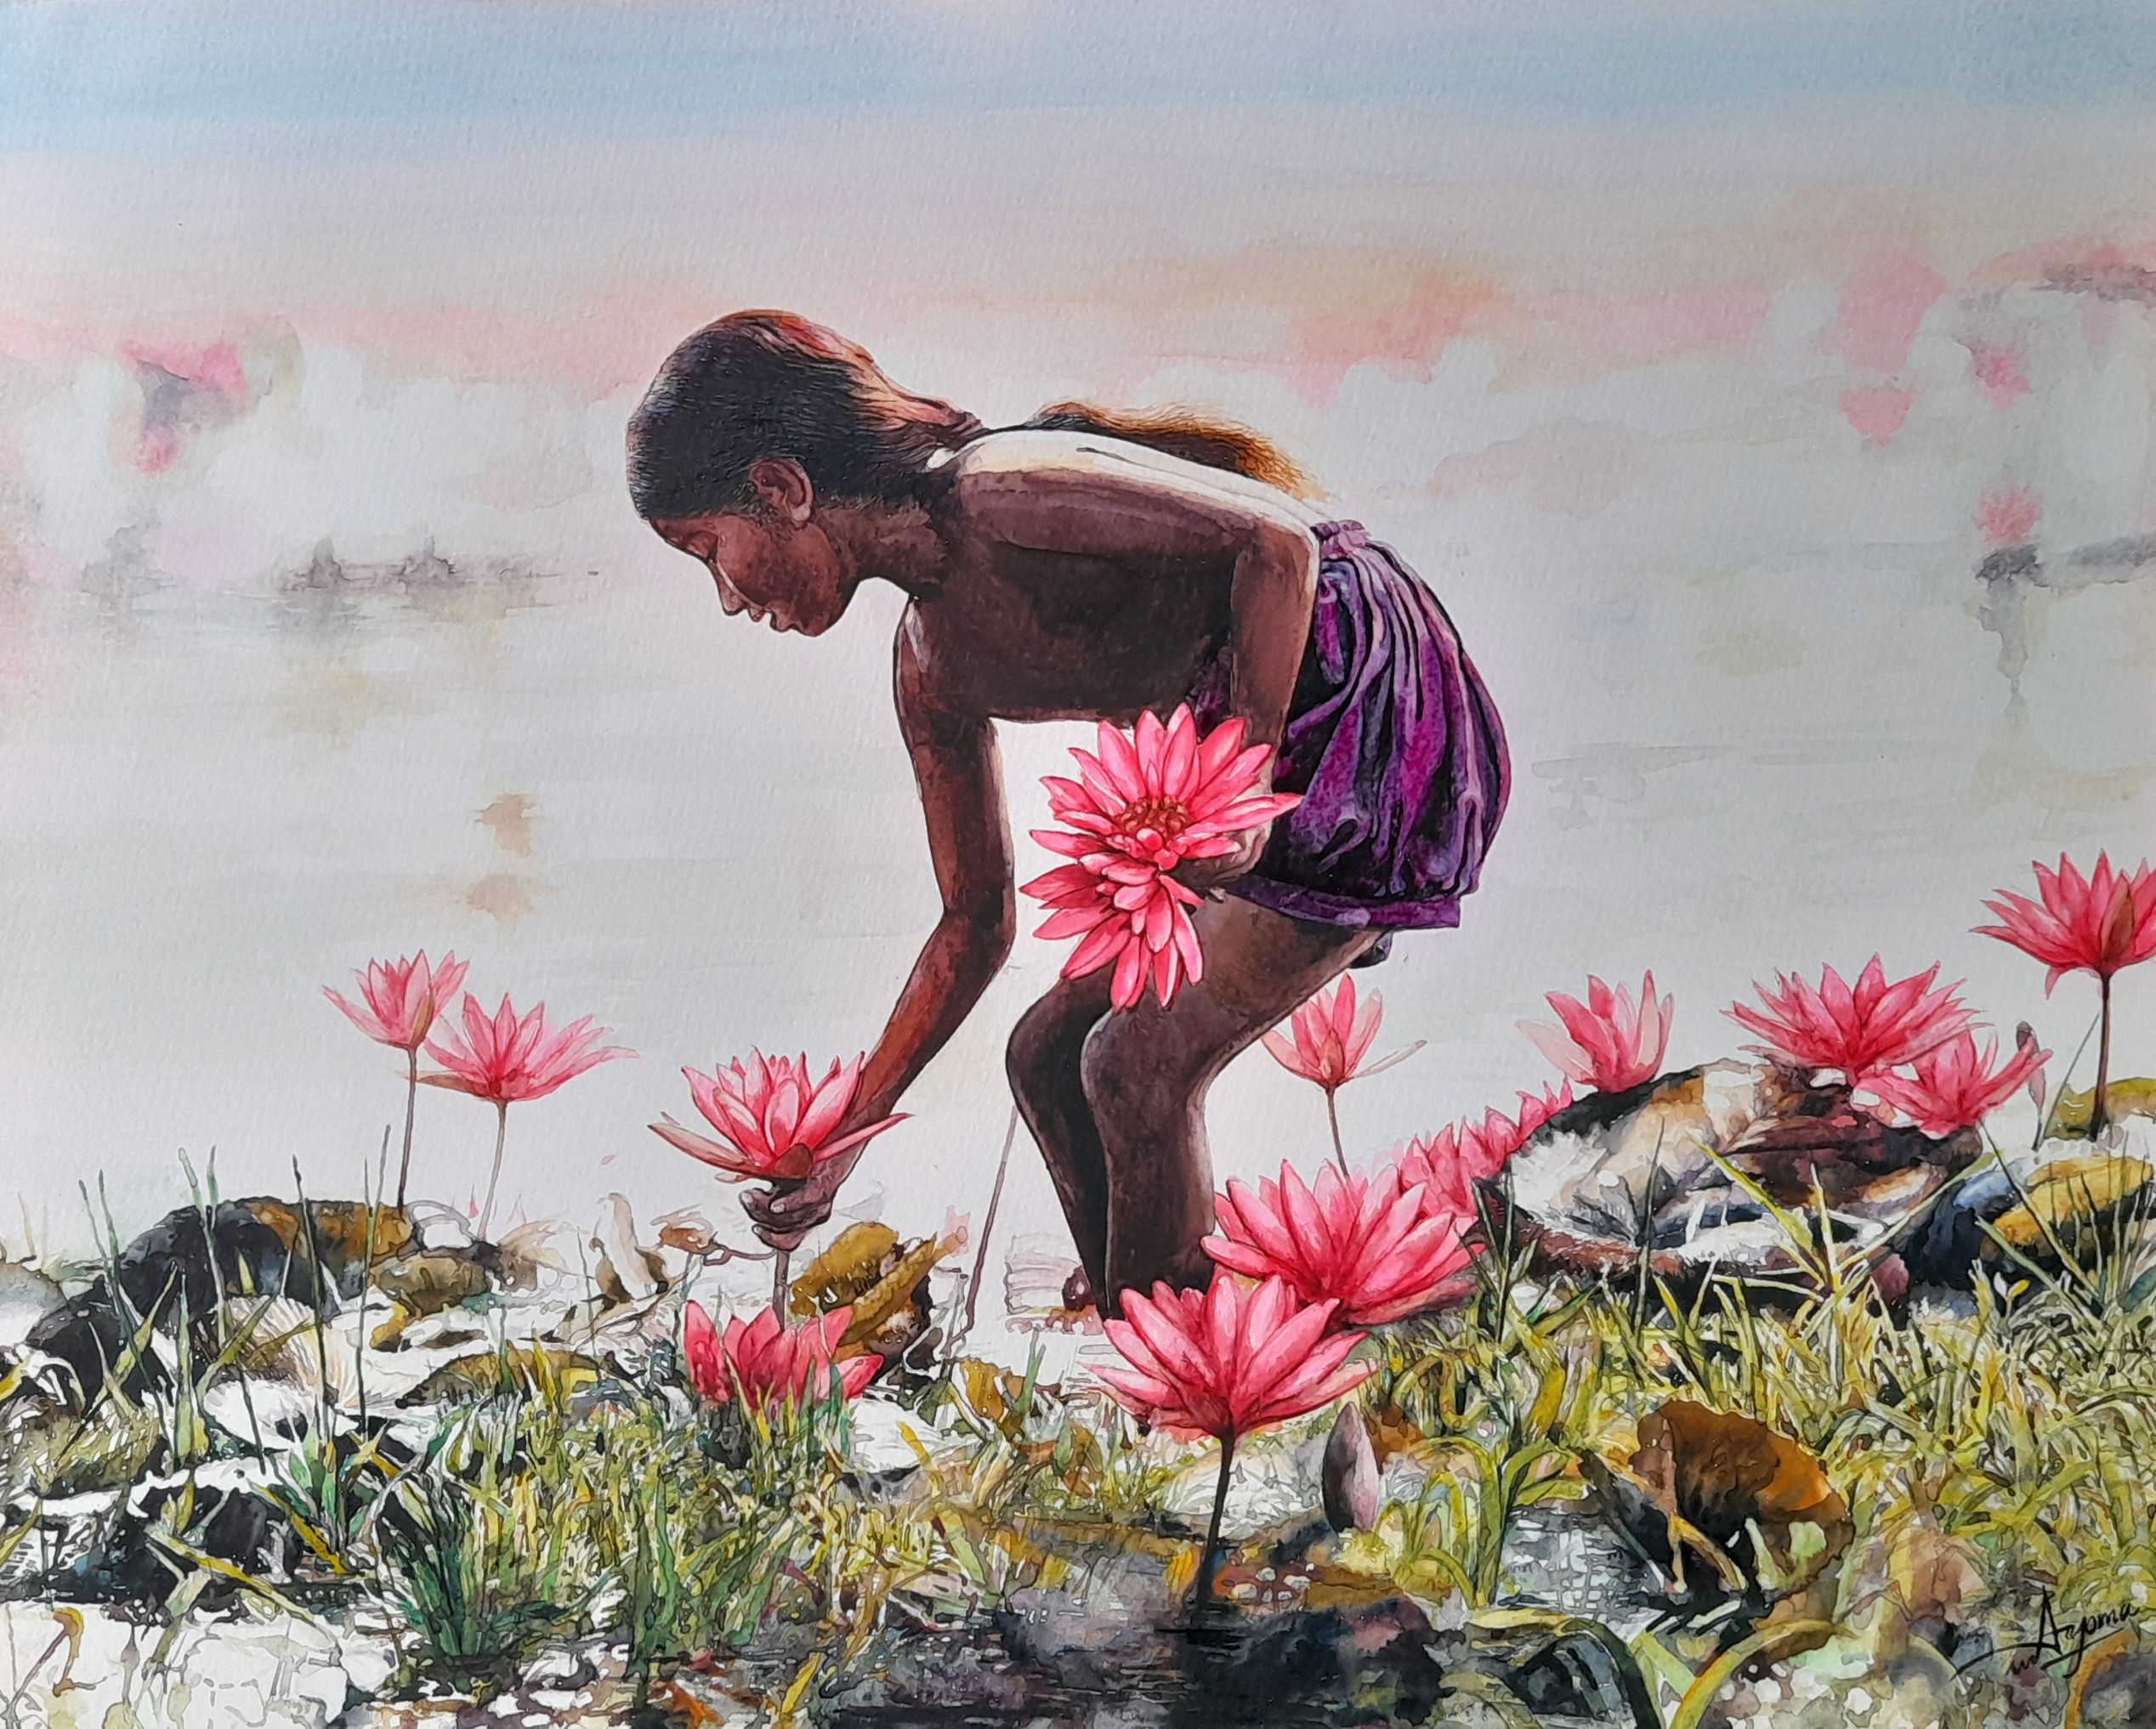 Girl with flowers. by Ayoma Wijerathne